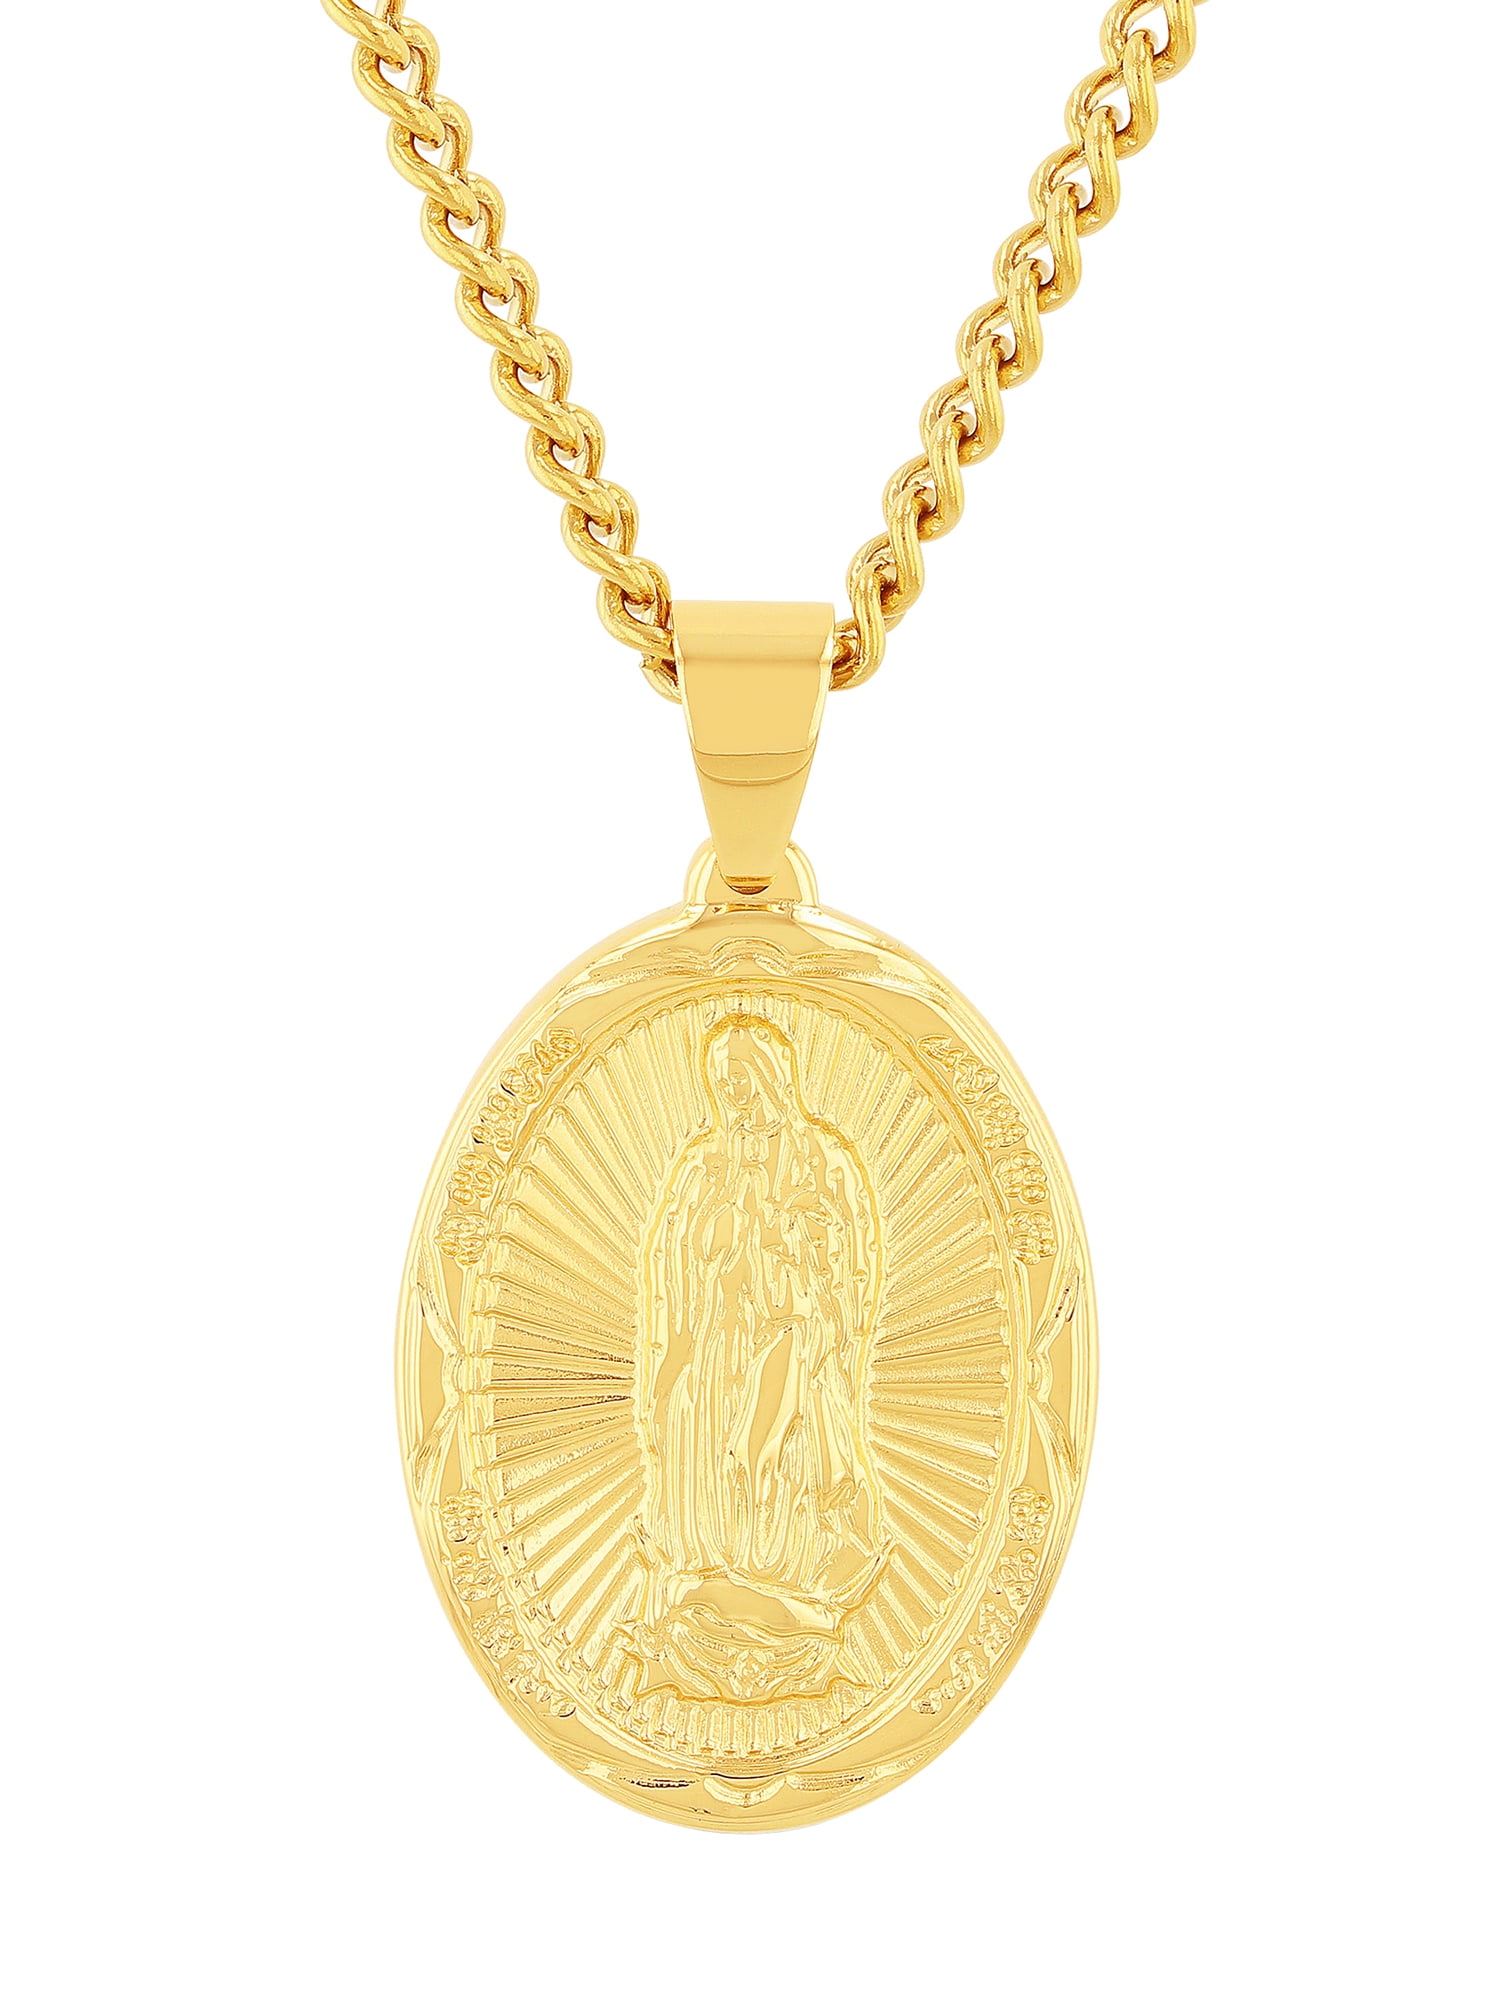 Believe by Brilliance Men's Stainless Steel Gold-Tone Virgin of Guadalupe Medallion Pendant Necklace